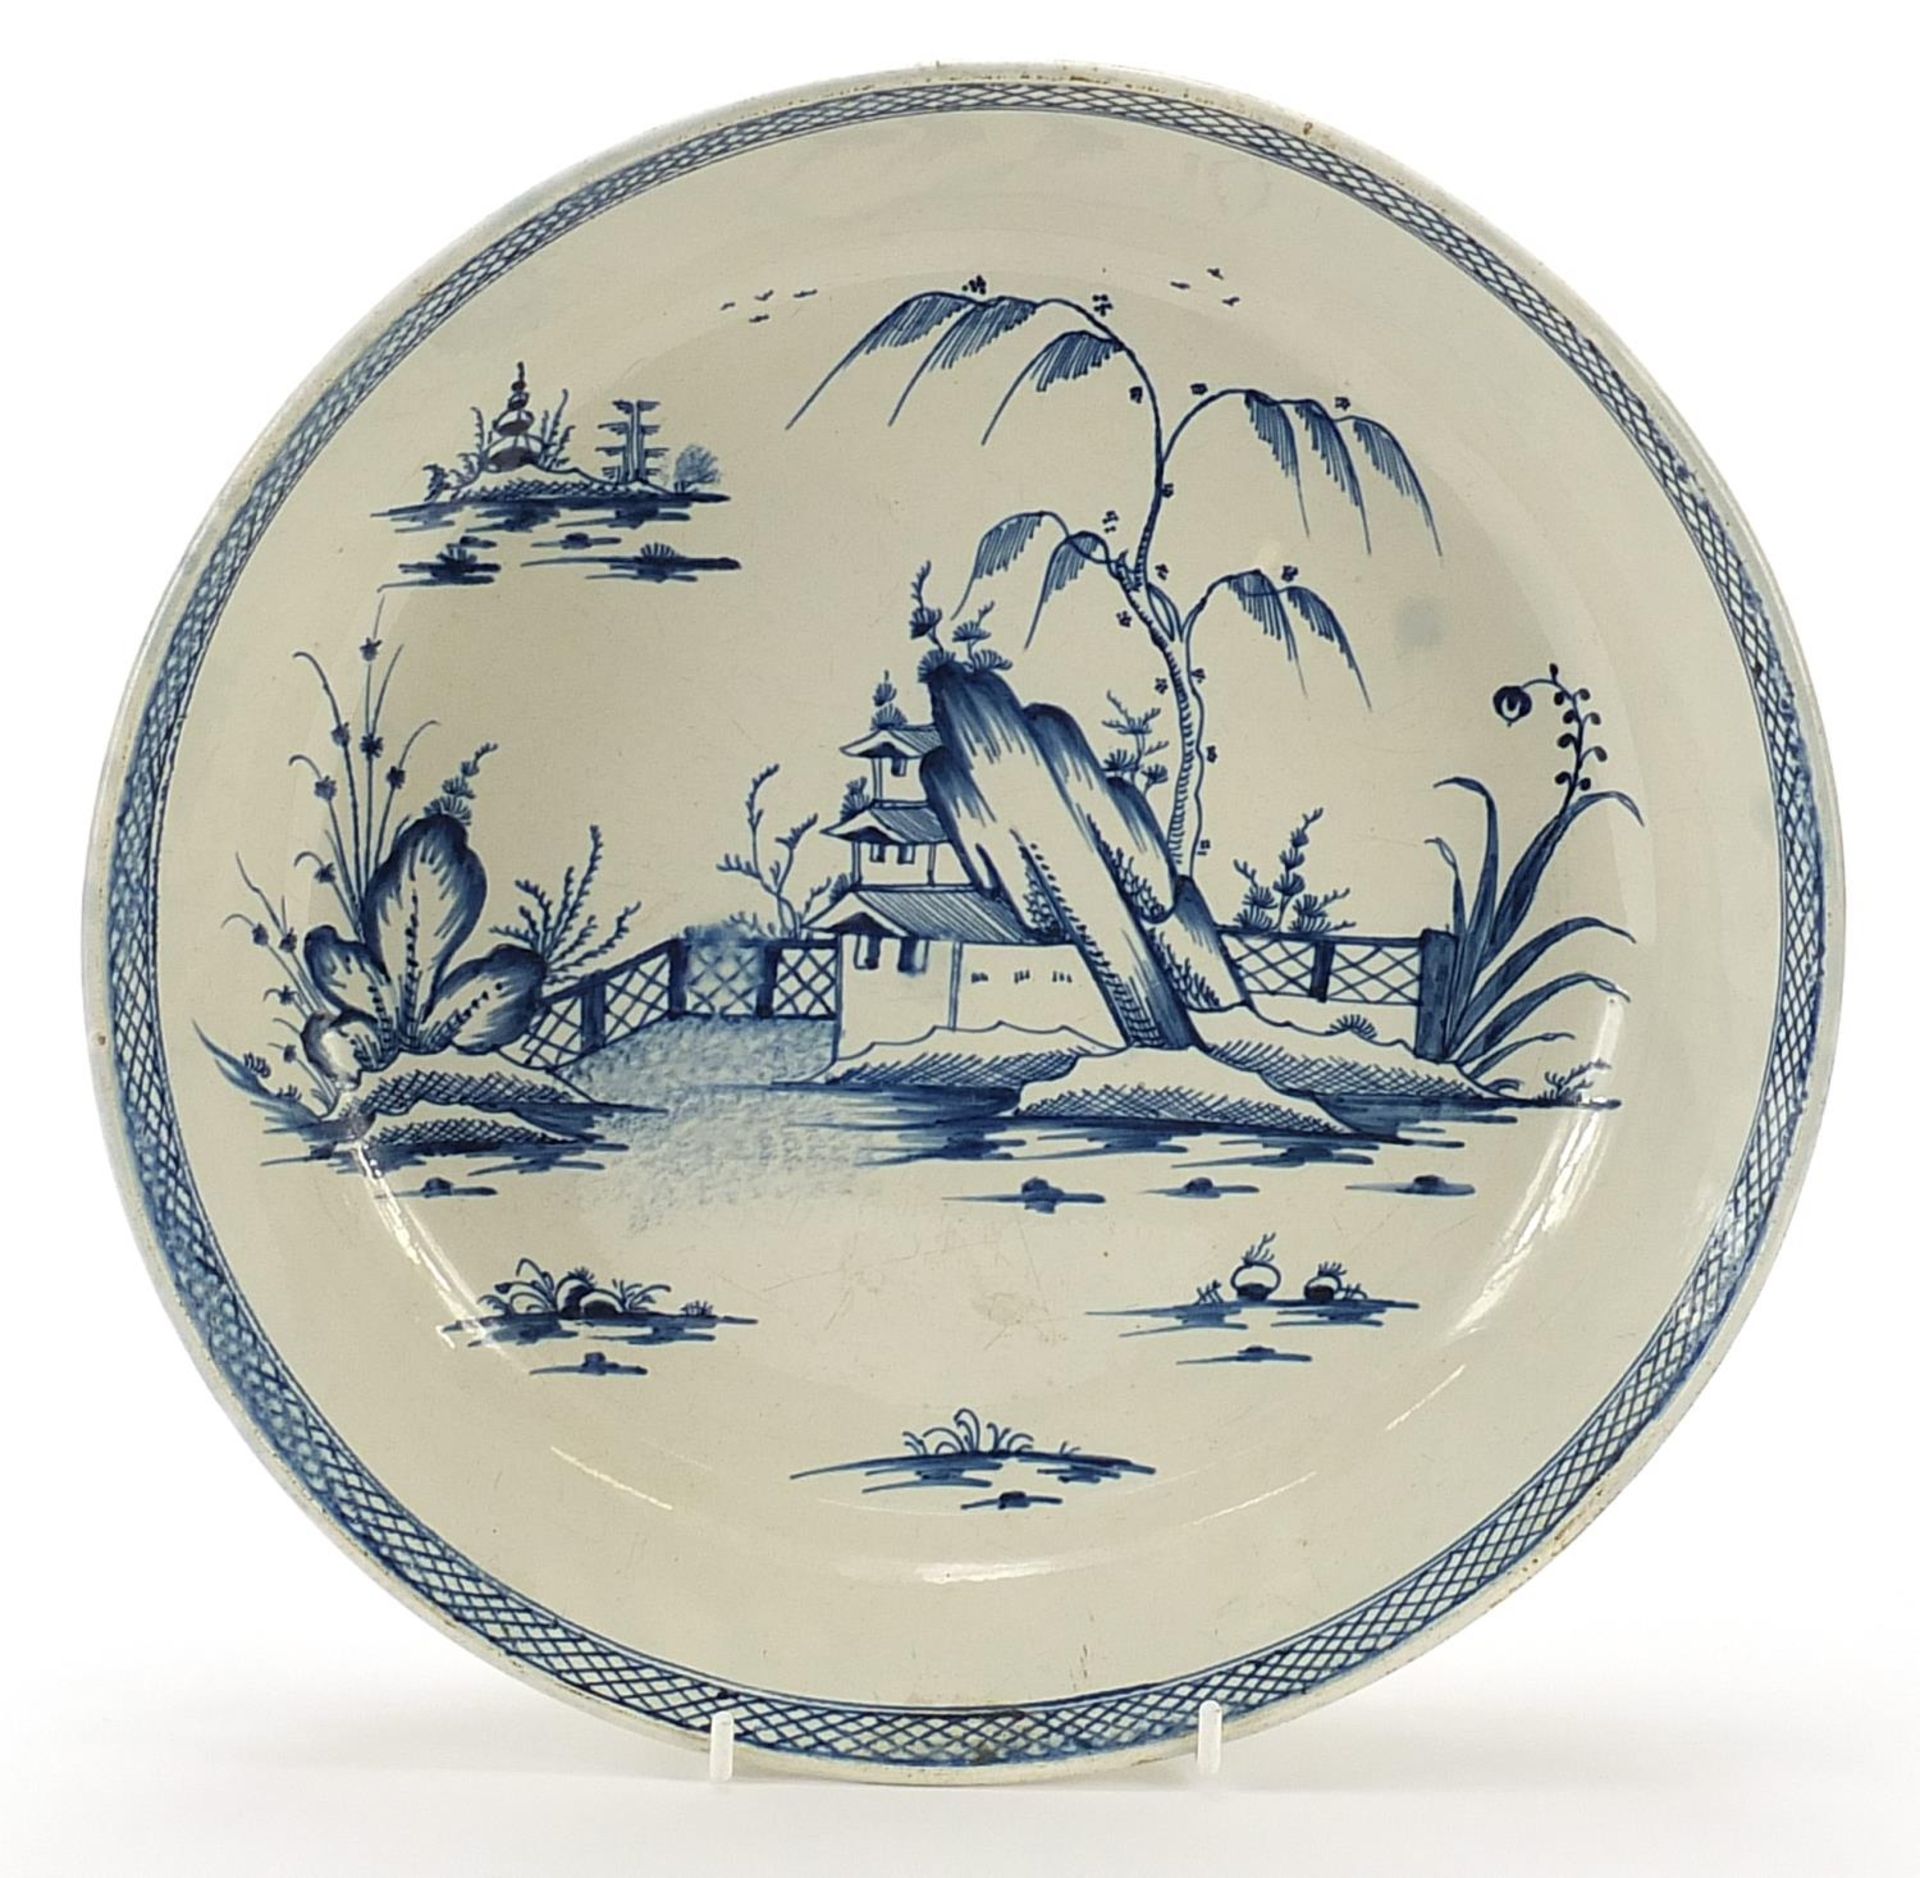 Late 18th century pearlware salad bowl, possibly Liverpool, hand painted with a Chinese scene, 28.